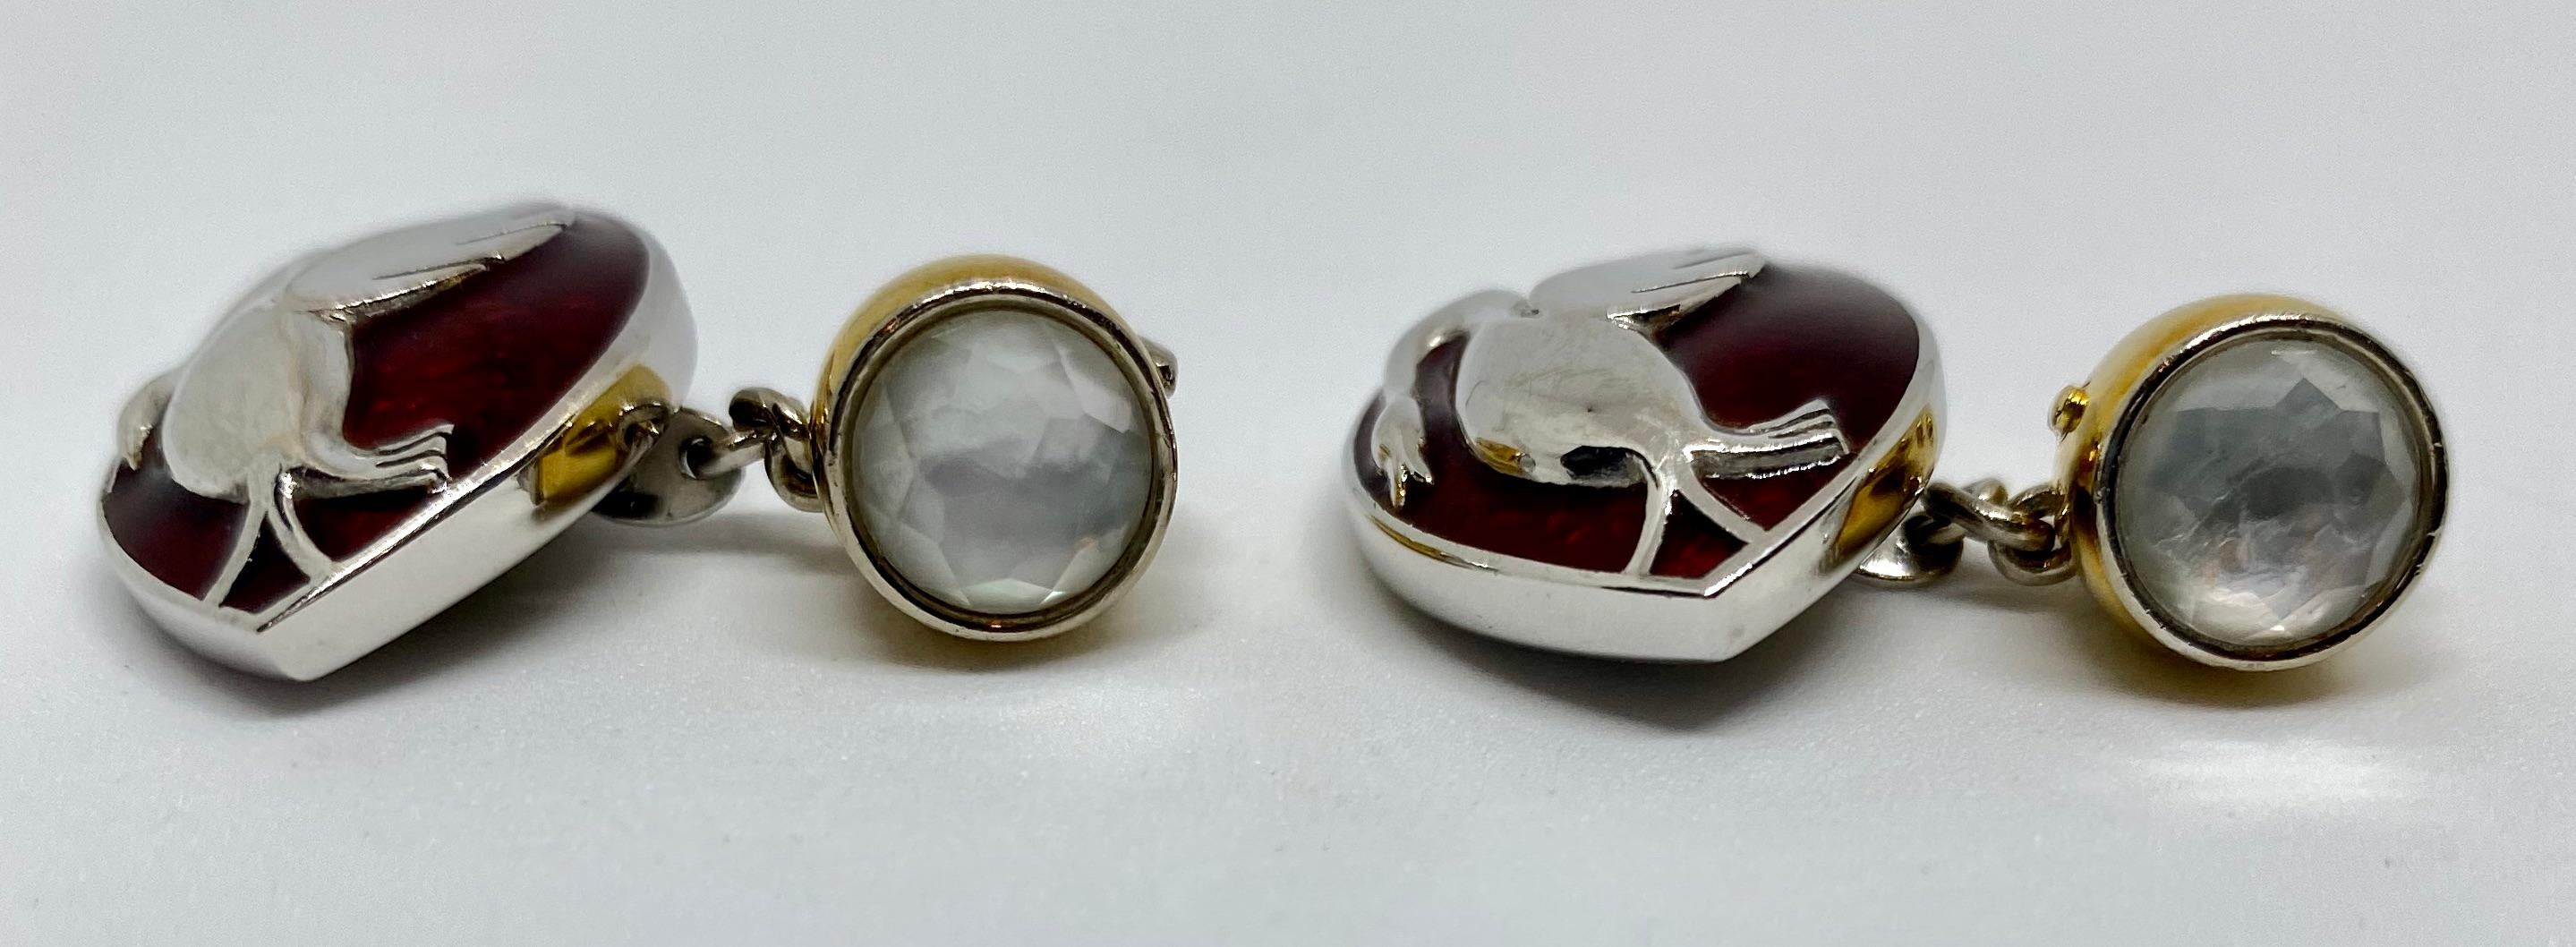 One-of-a-kind cufflinks custom-made in London for a collector of Packard Motor Cars. Rendered in solid 18K white and yellow gold, the lozenge-shaped faces bear the Packard cormorant emblem on a red enamel background. The backs, connected via 18K